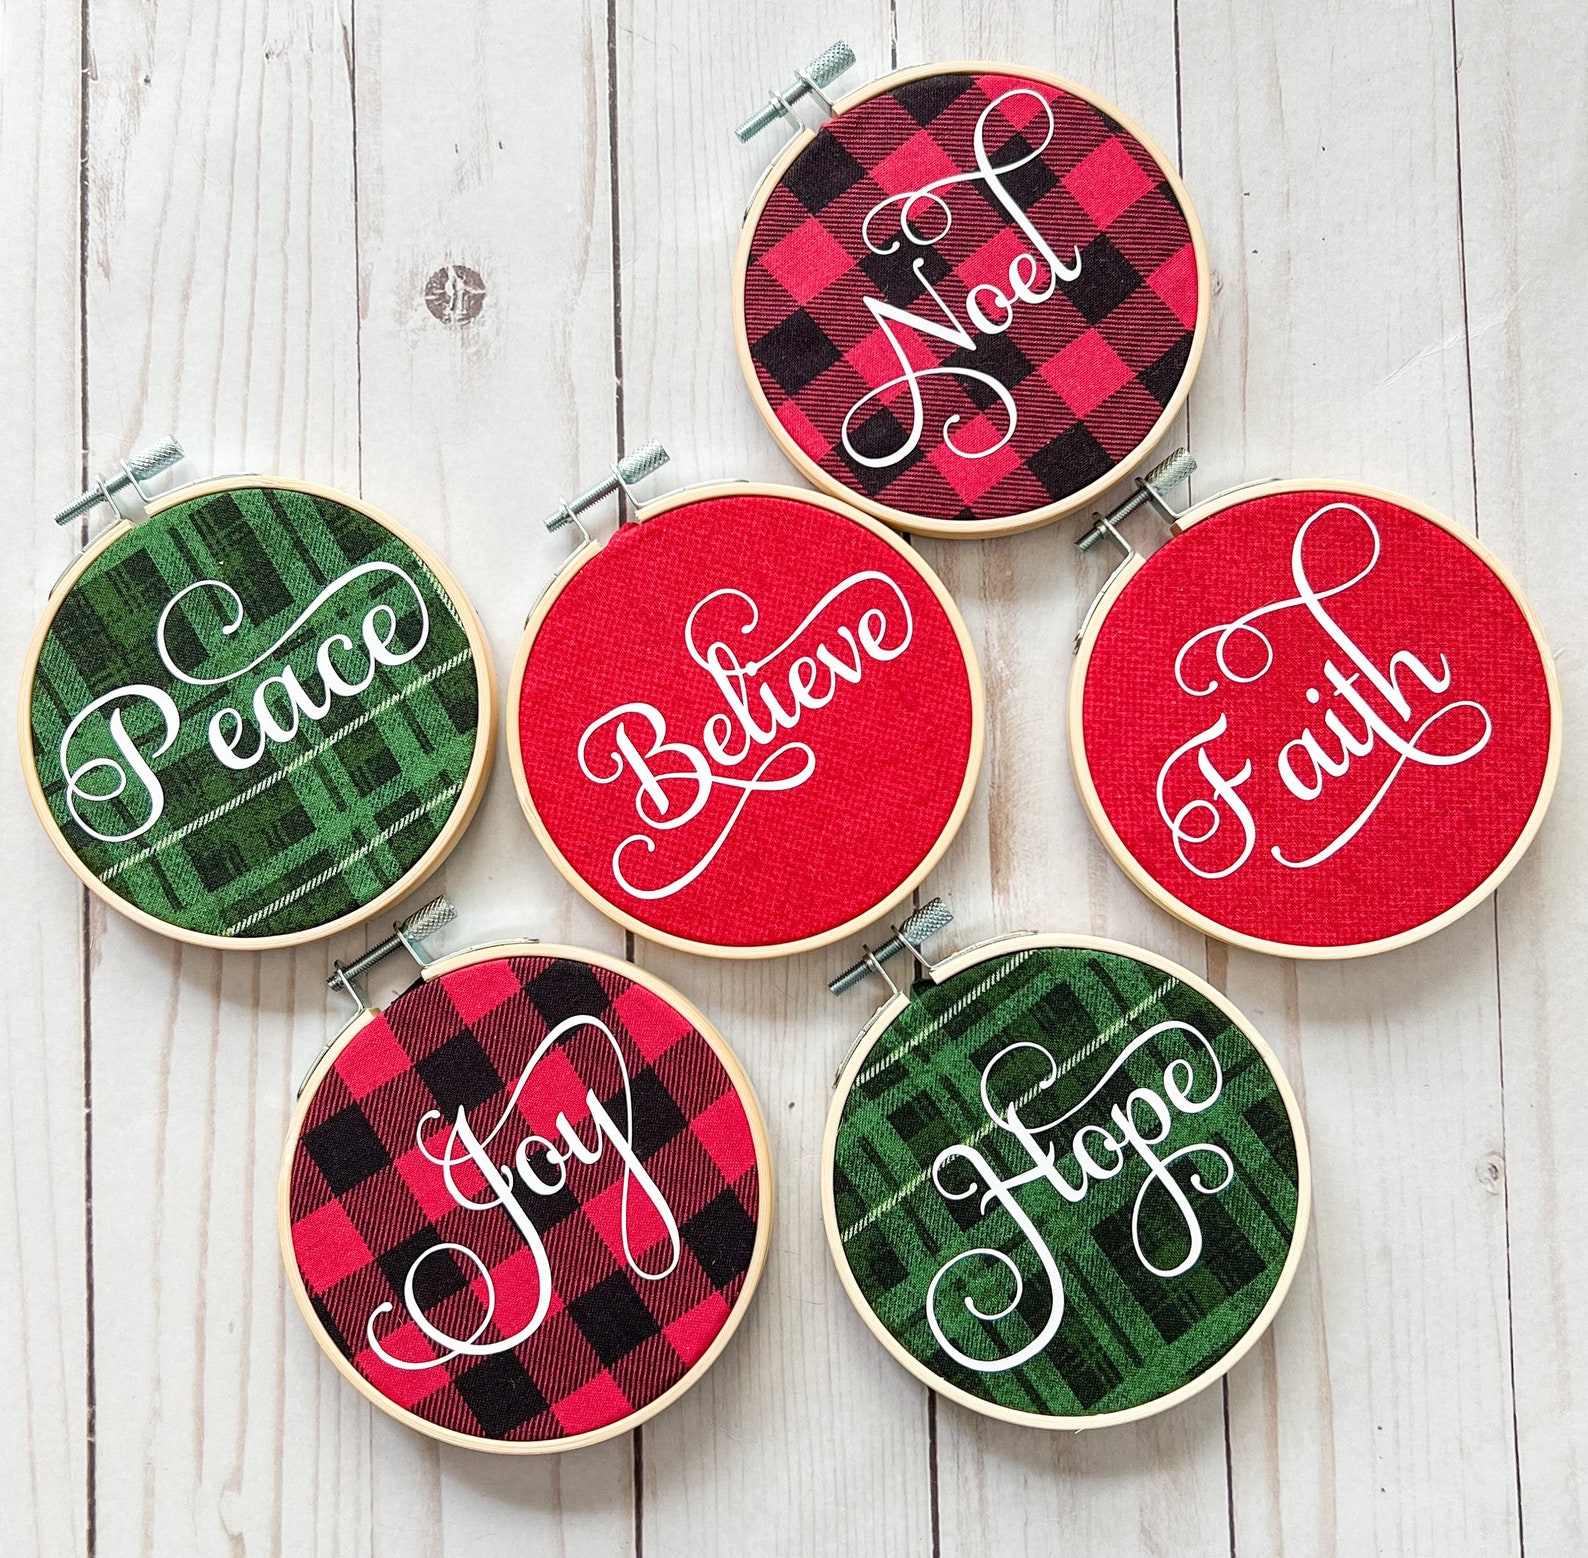 Gifts under $15: Christmas embroidery hoop ornaments from Hundred Acre Design Co